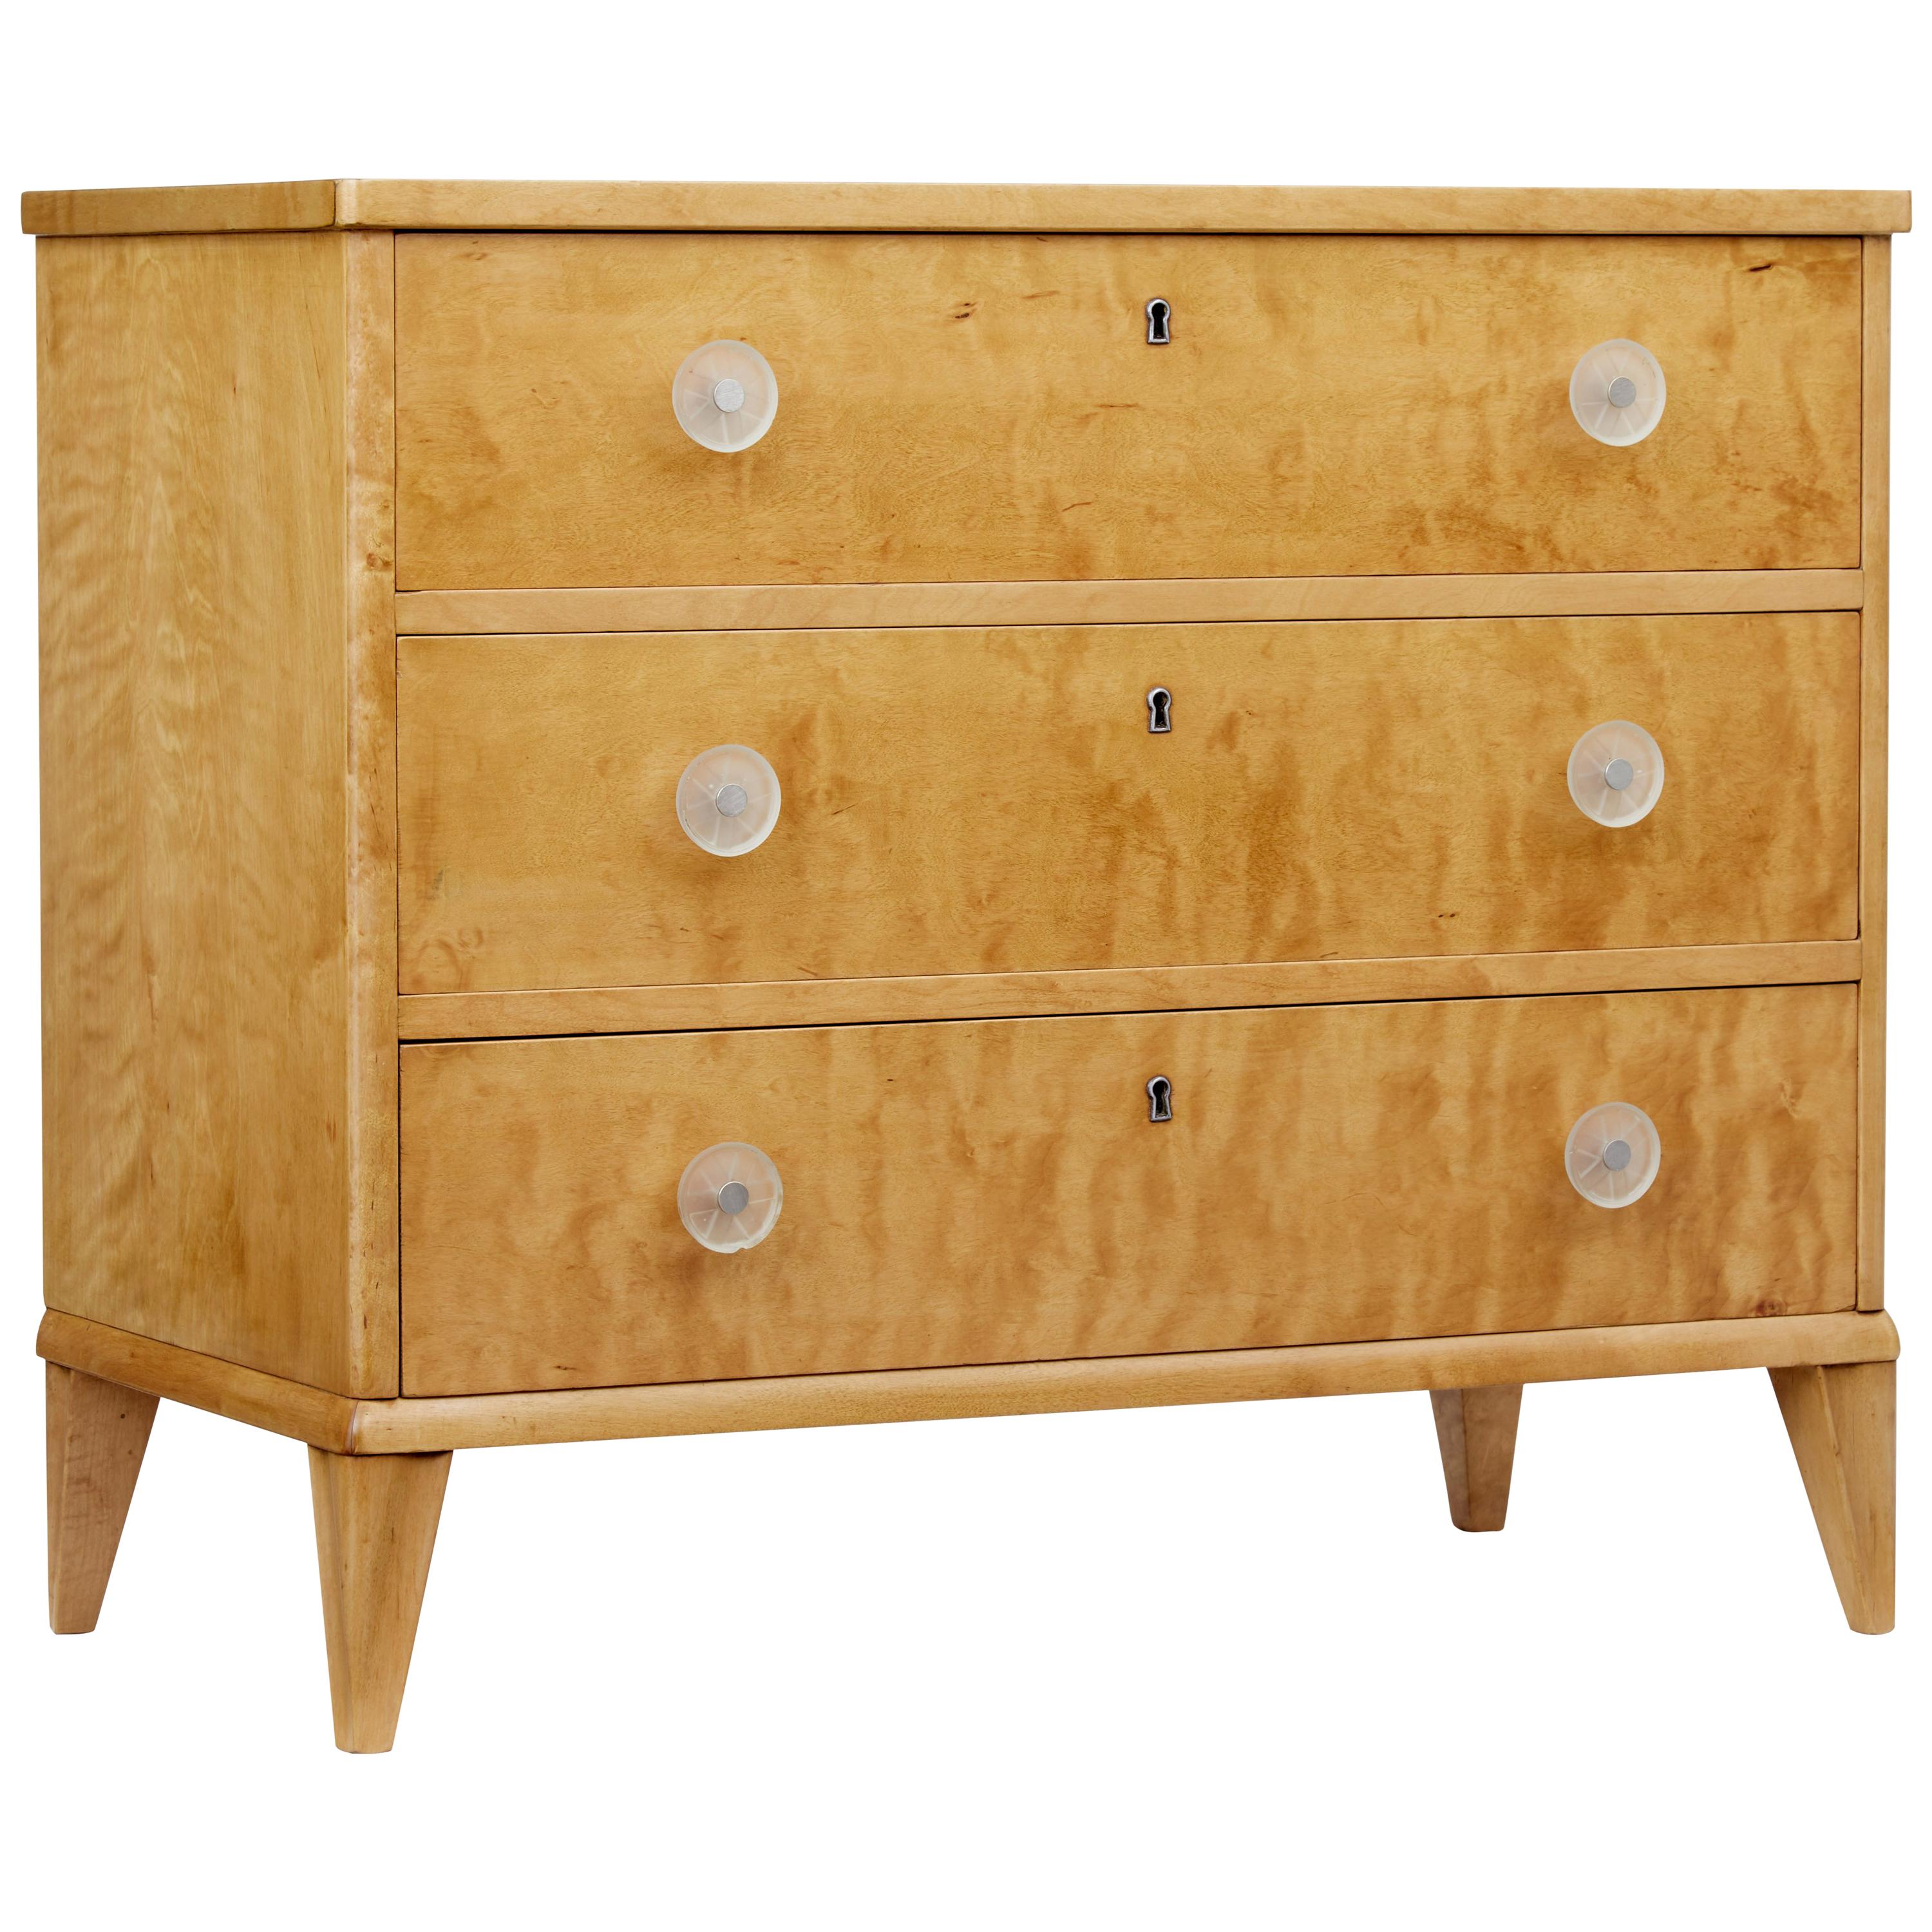 Mid-20th Century Birch Chest of Drawers